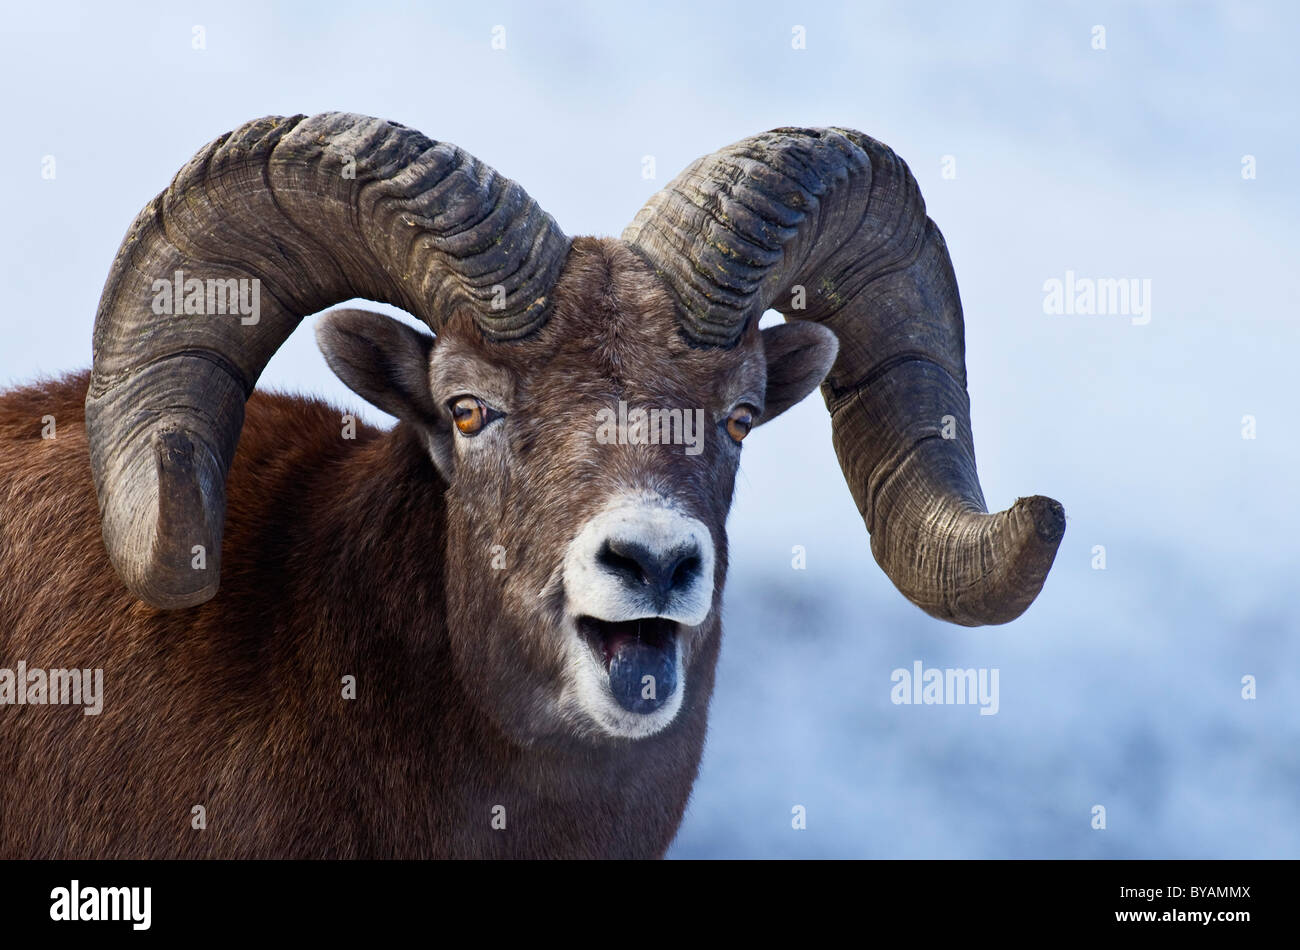 A wild Bighorn Sheep with a humors facial expression Stock Photo